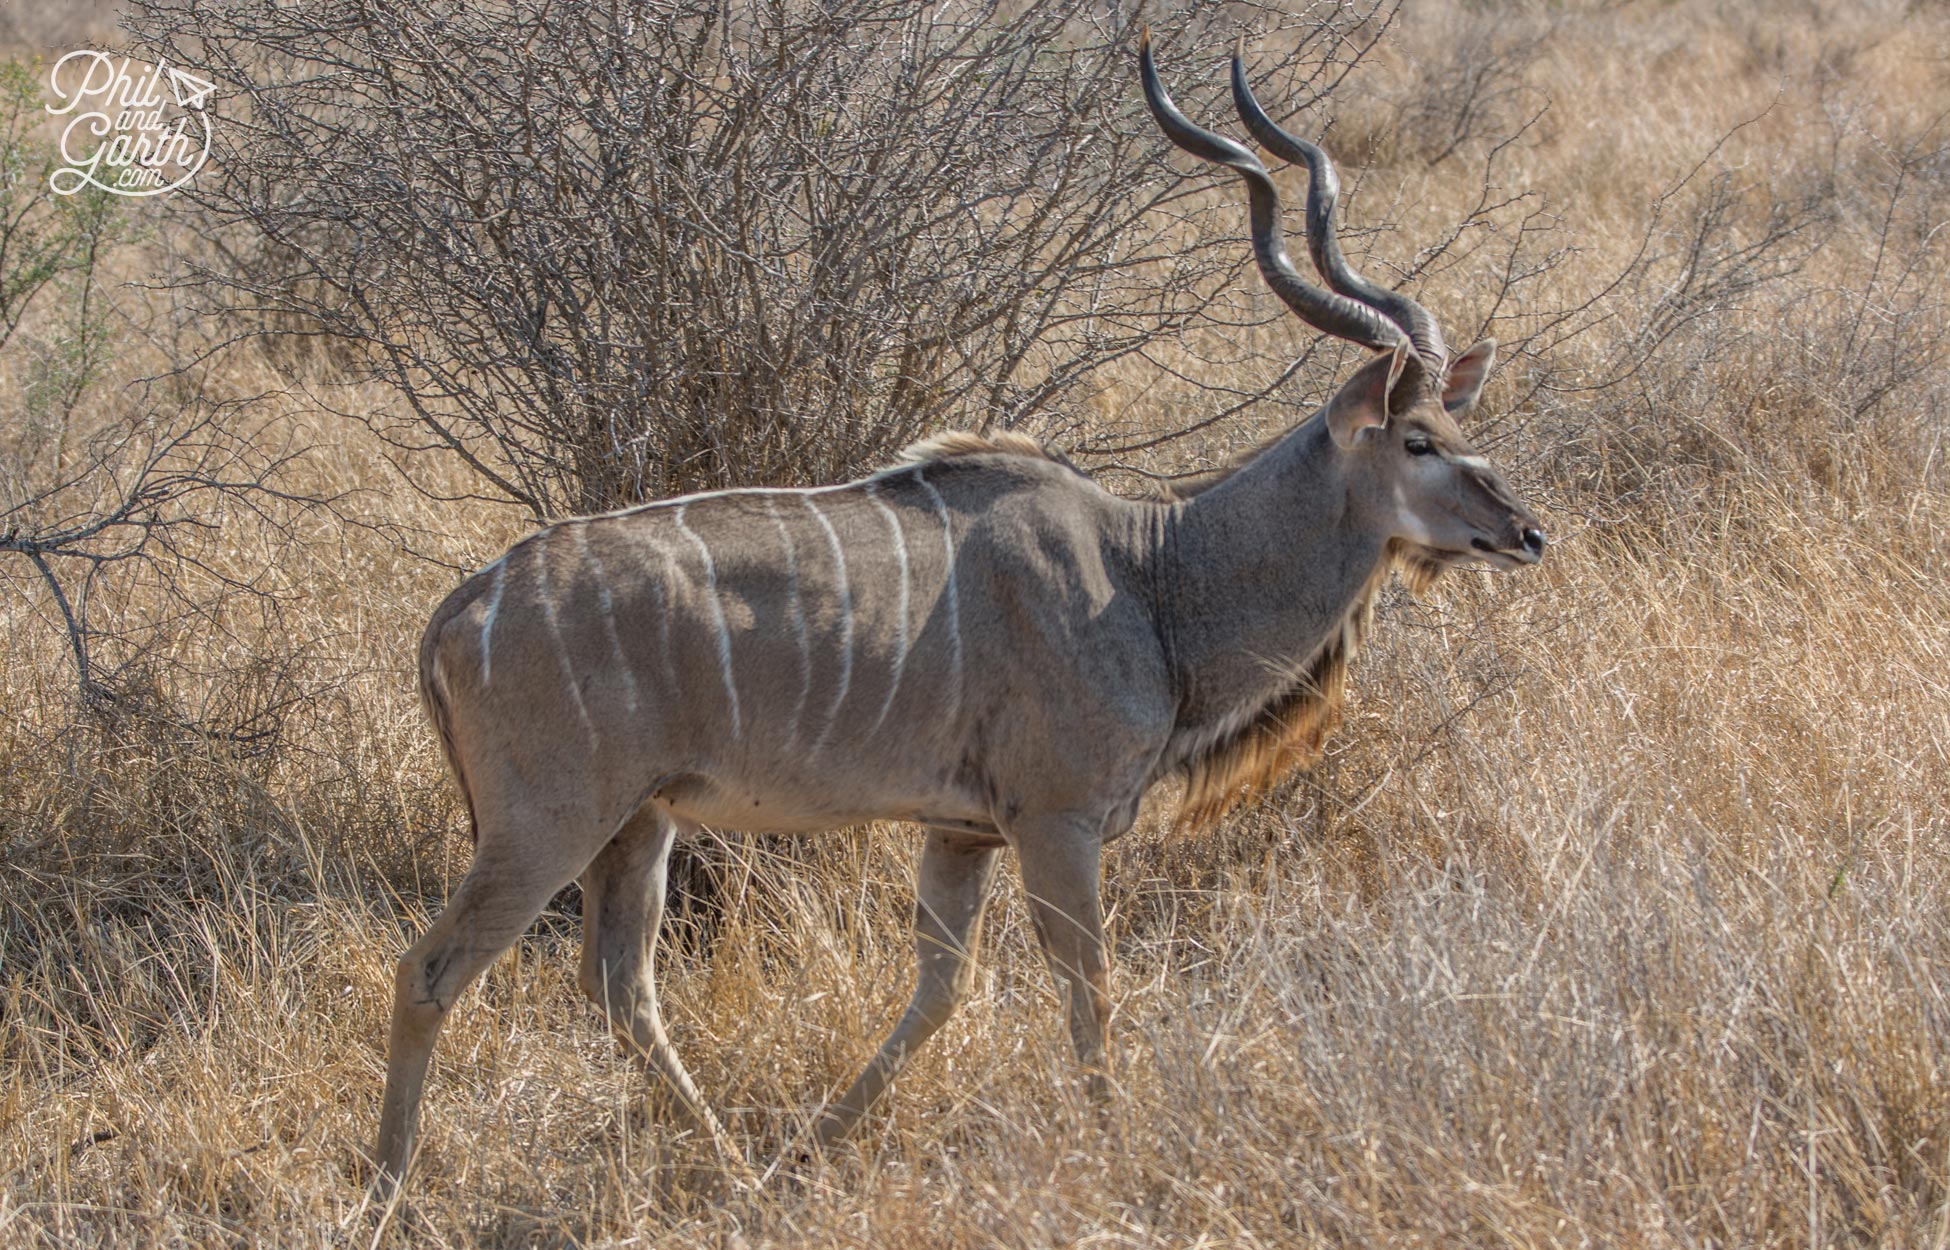 Kudus have 4 to 12 vertical white stripes along their body